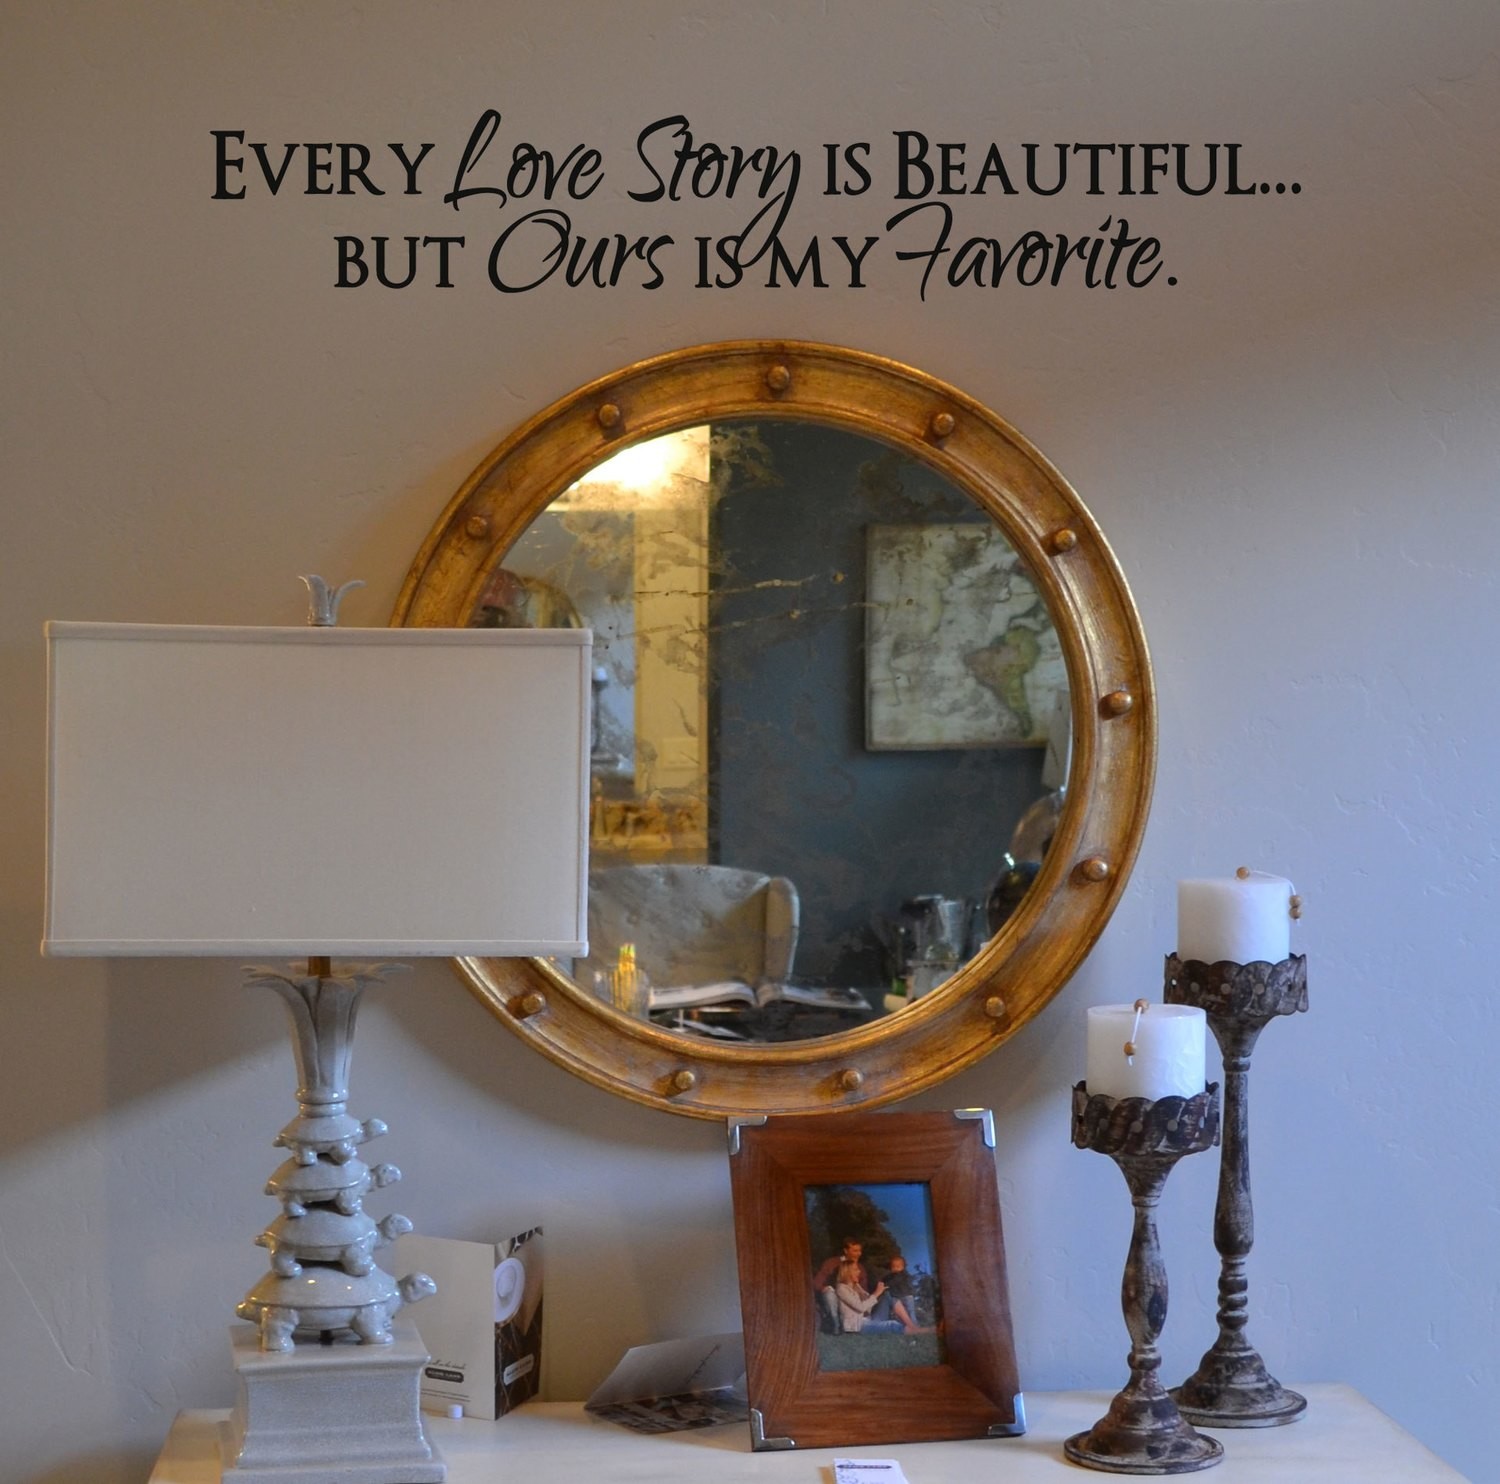 Every love story is beautiful wall decal KW217